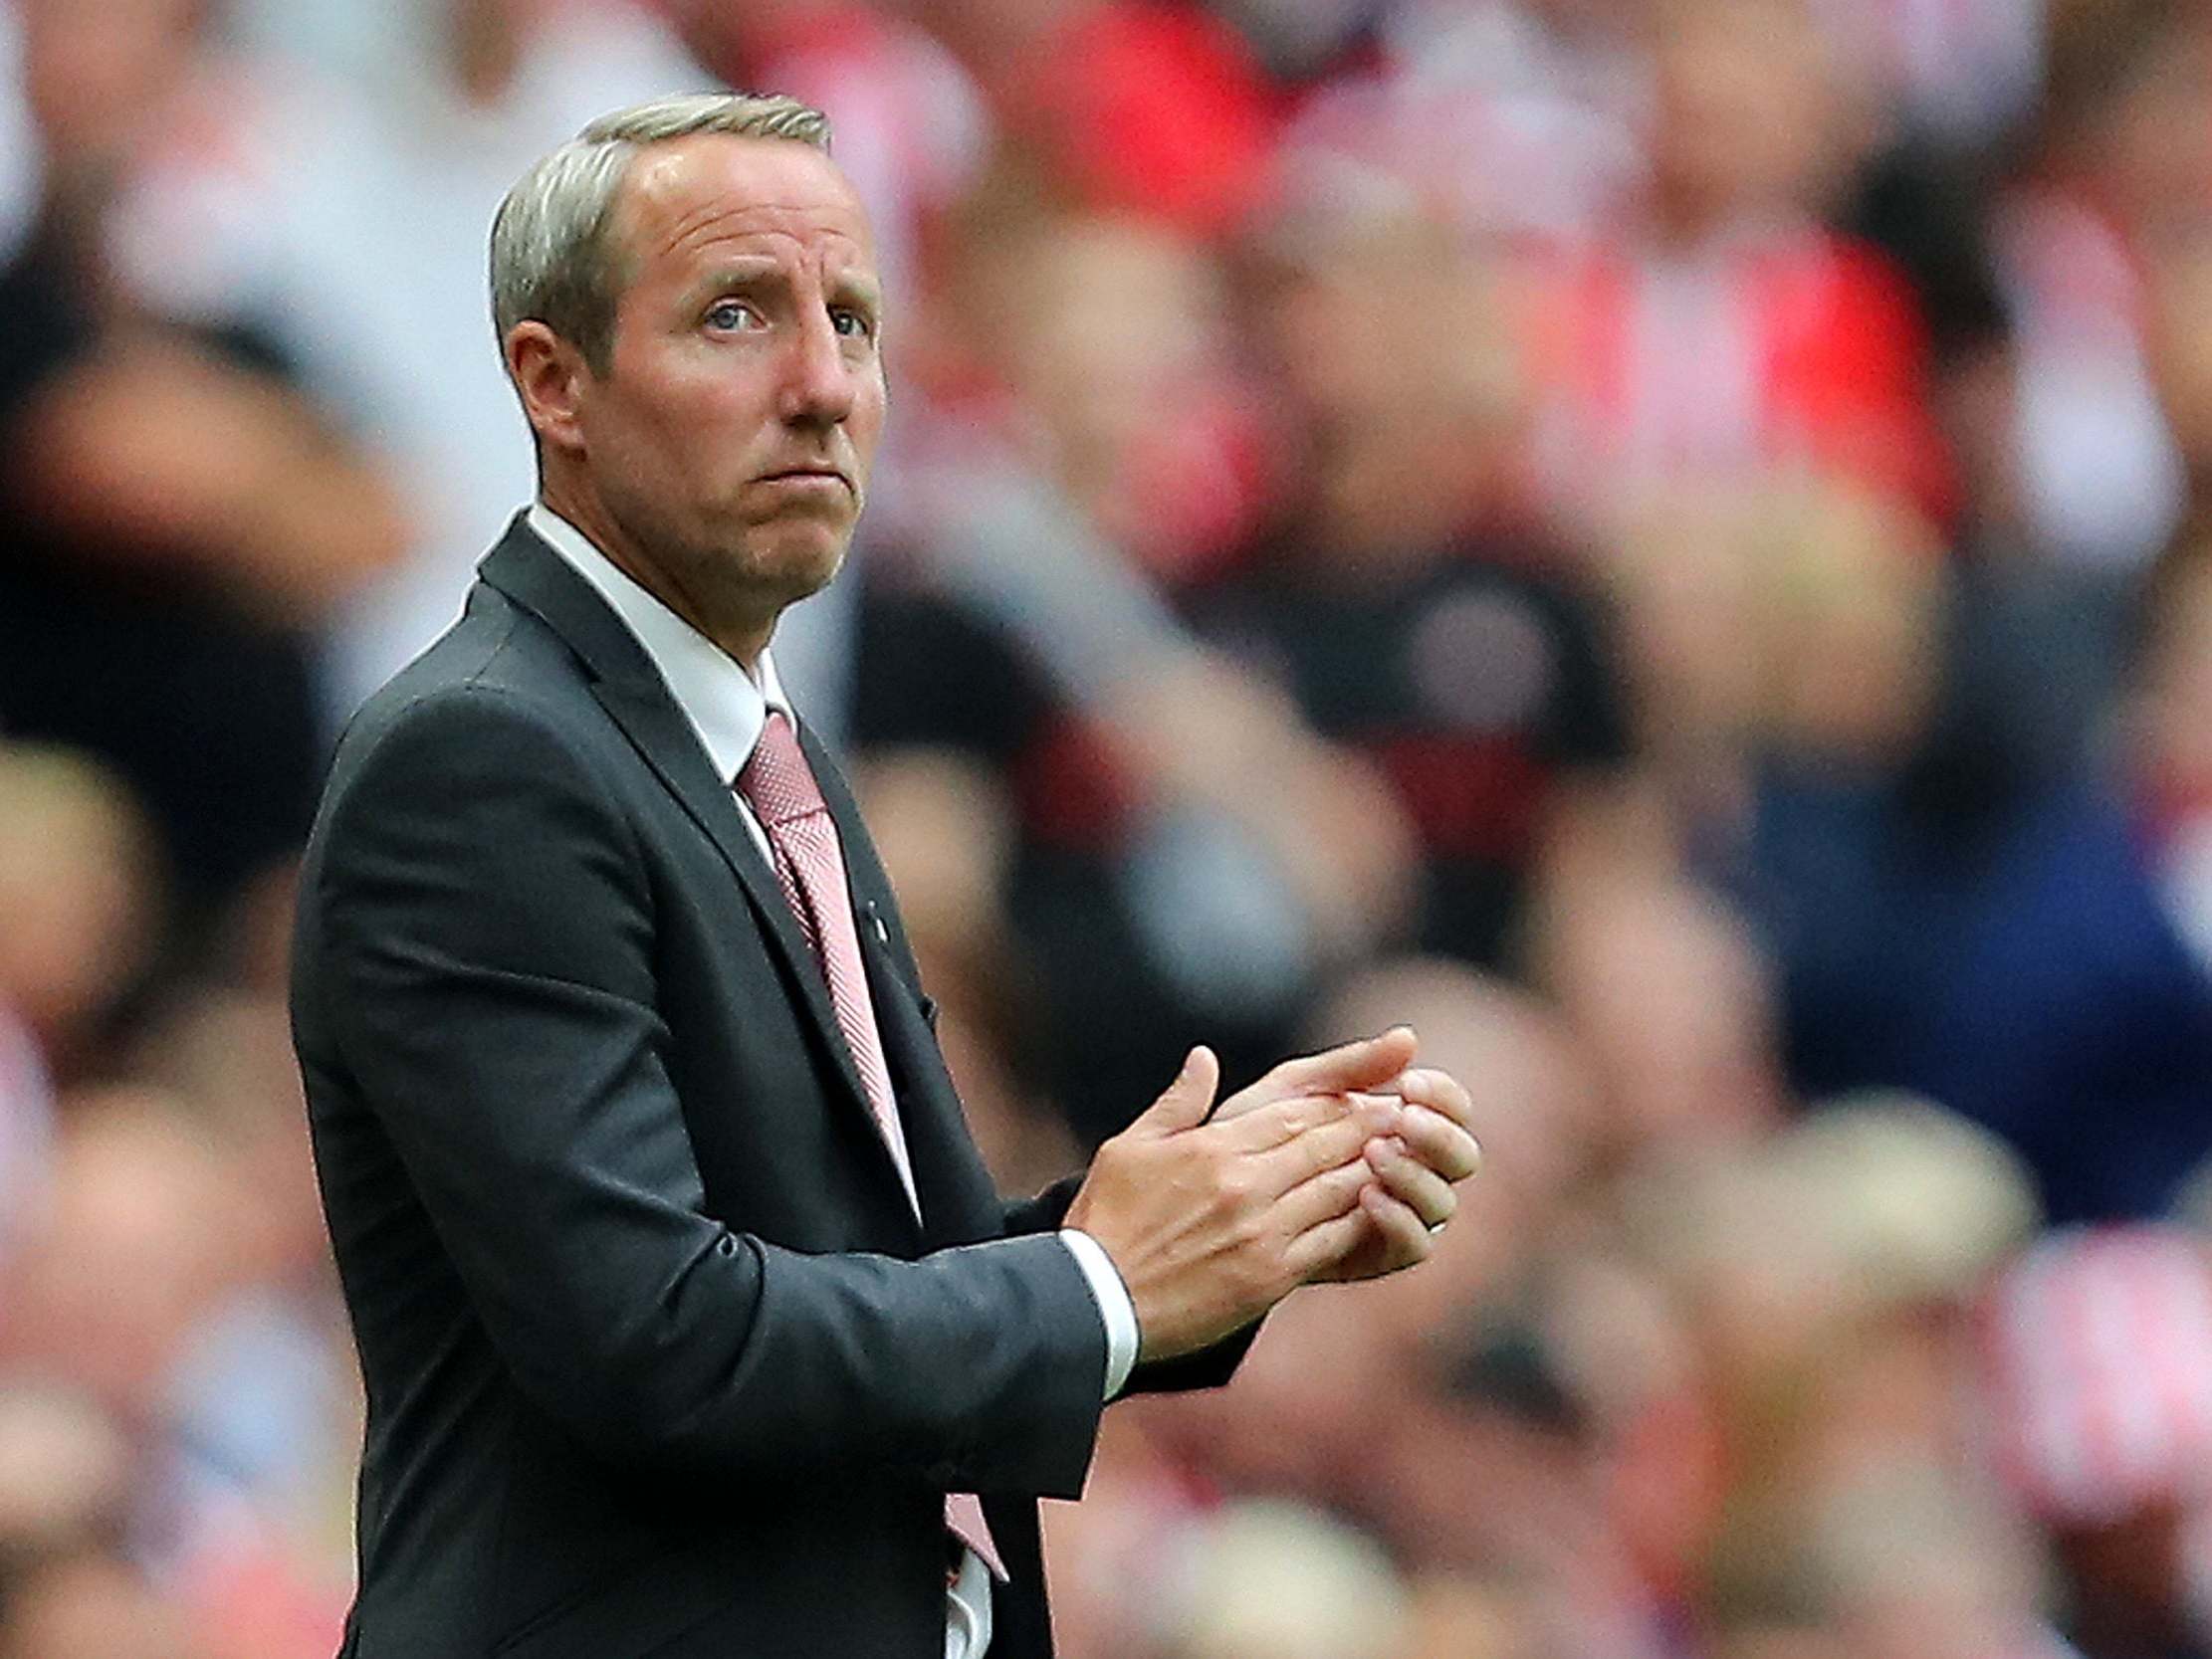 Lee Bowyer is likely to leave Charlton Athletic when his contract expires